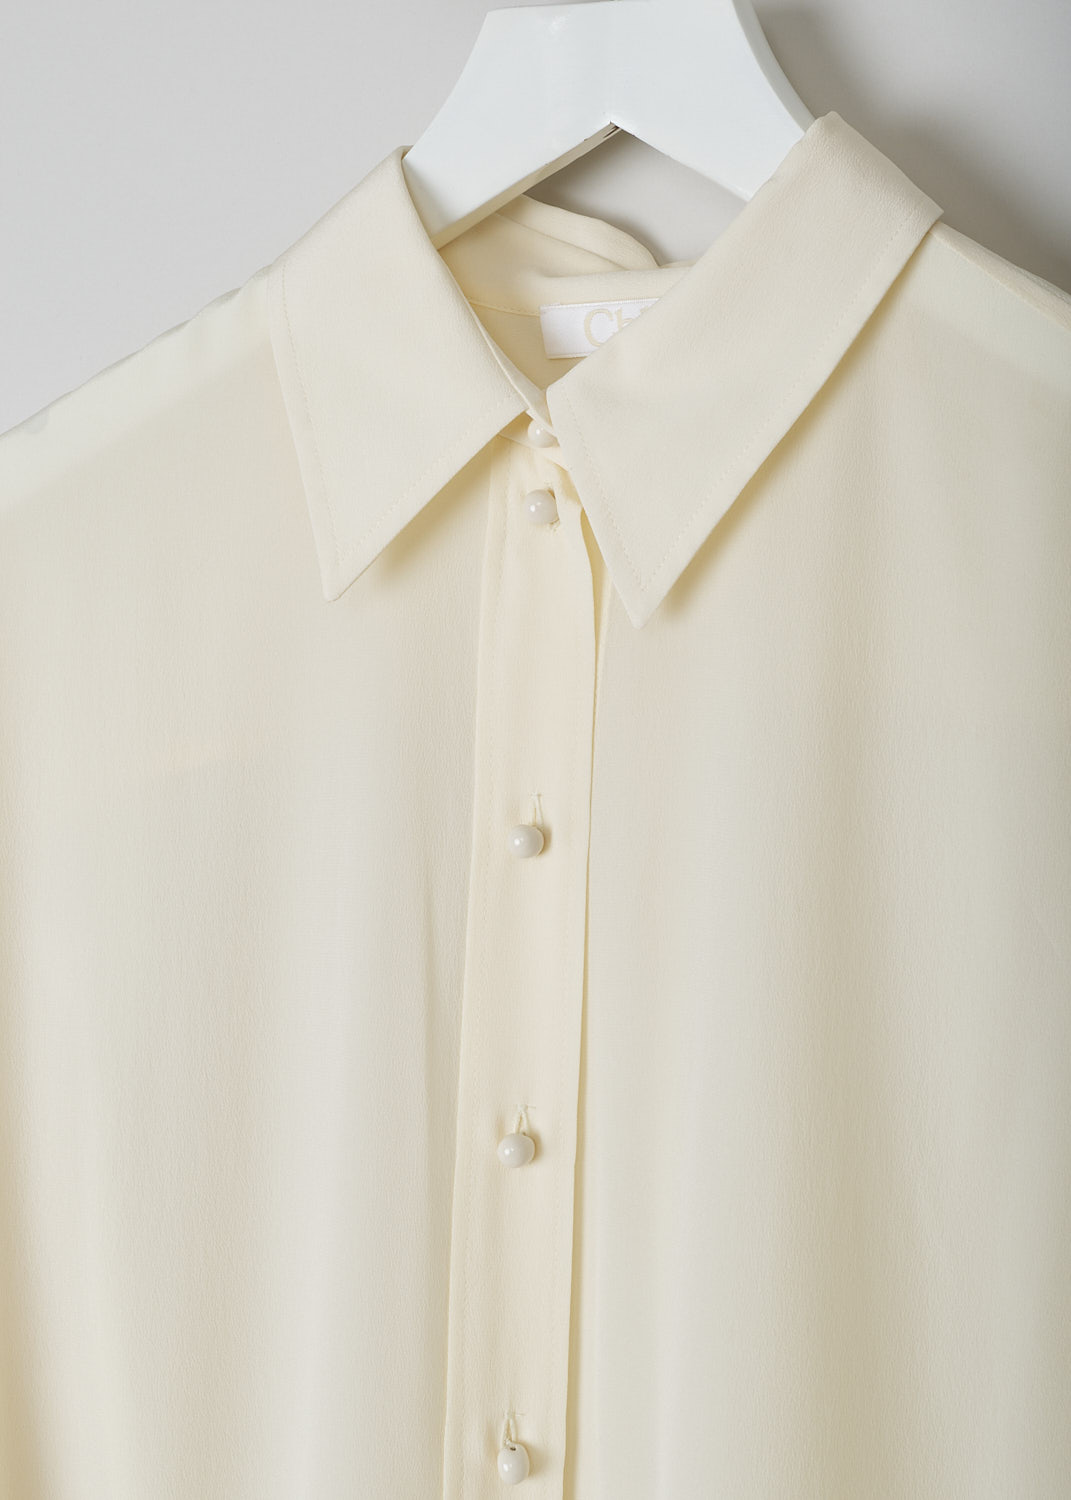 CHLOÉ, PRISTINE WHITE SILK BLOUSE, CHC22UHT05004114, White, Detail, This silk Pristine White blouse has a classic collar and a button placket with round ceramic. The blouse has long sleeves with buttoned cuffs.  A centre box pleat runs vertically down the back.
